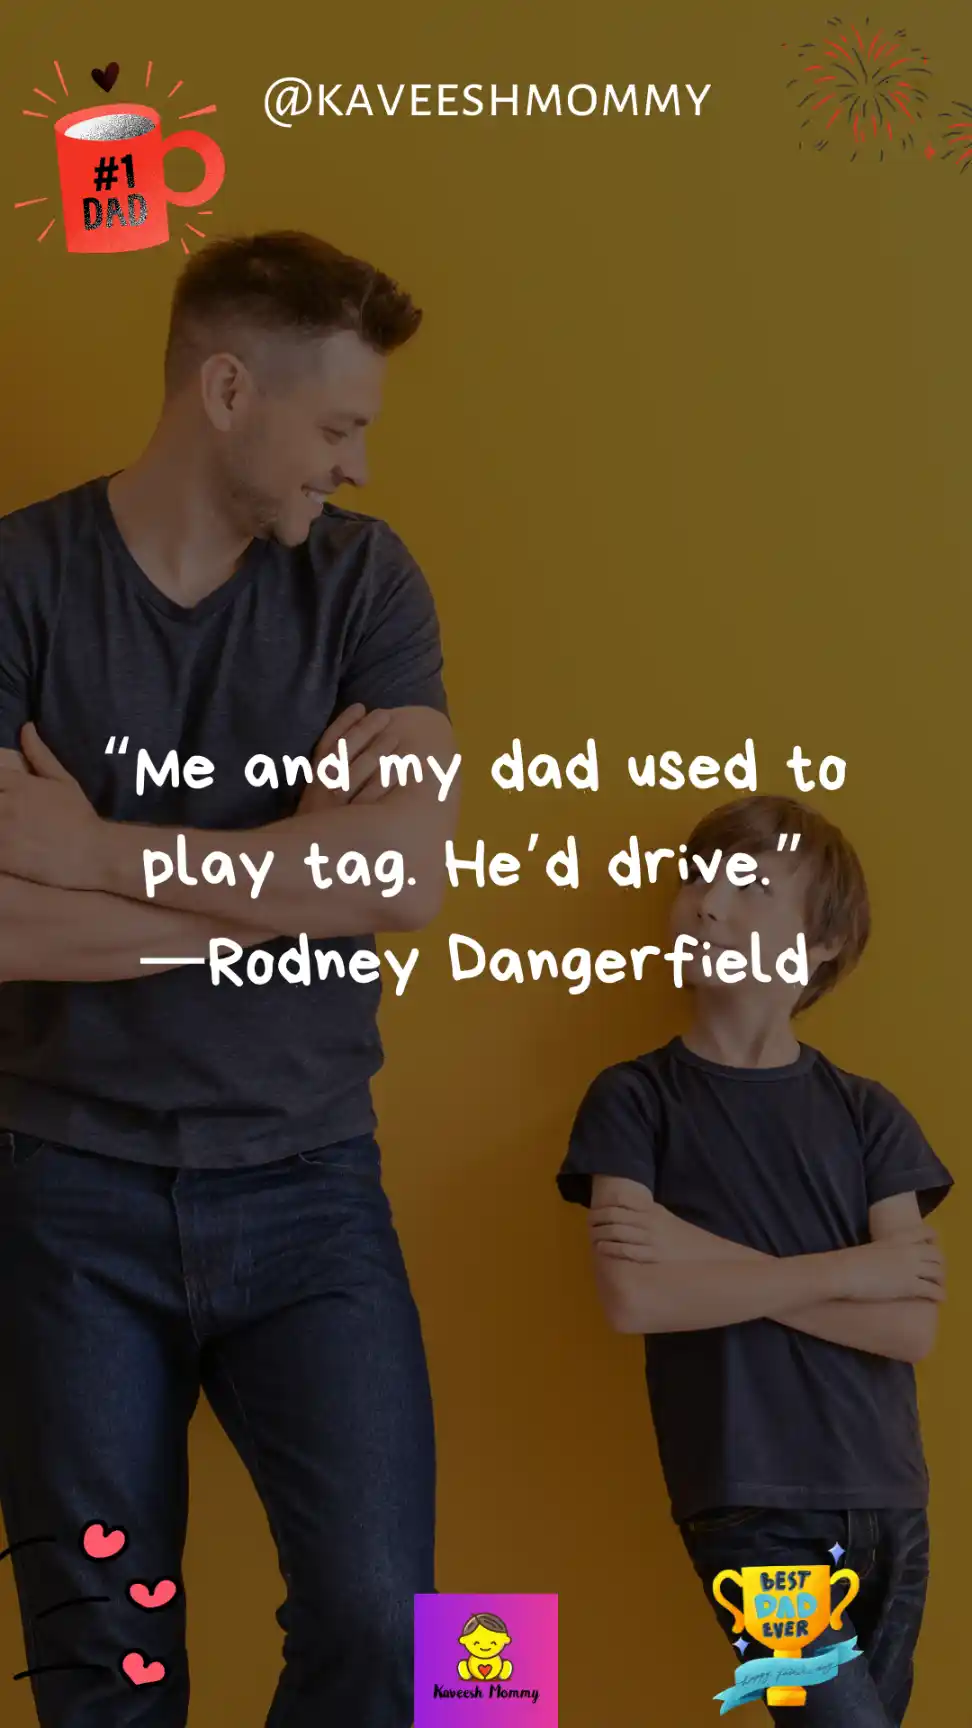 fatherhood quotes son“Me and my dad used to play tag. He’d drive.” —Rodney Dangerfield